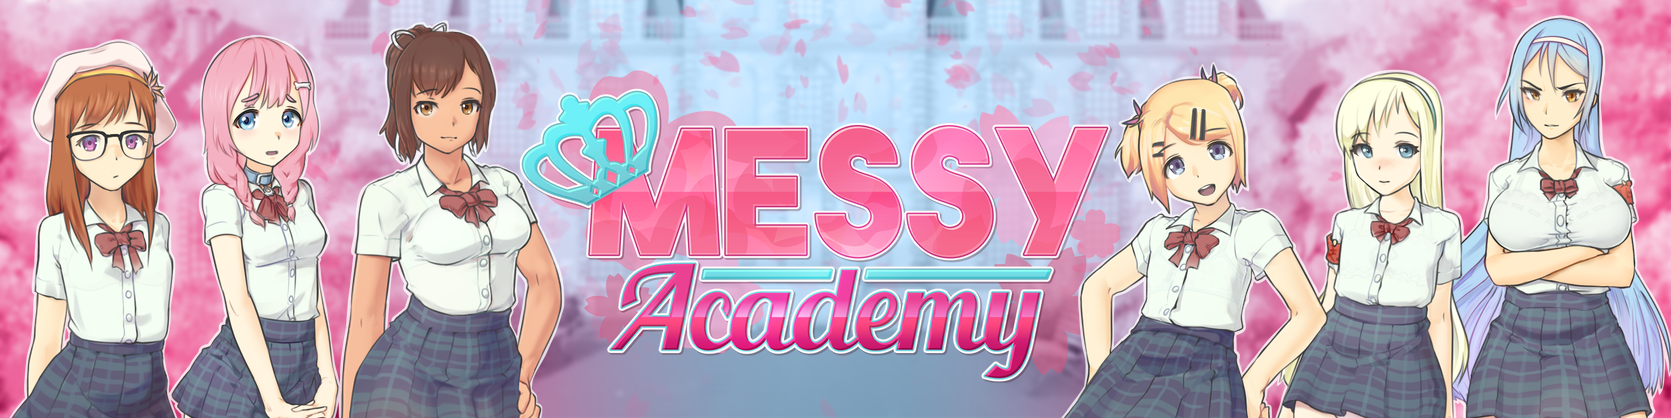 Messy Academy1.png